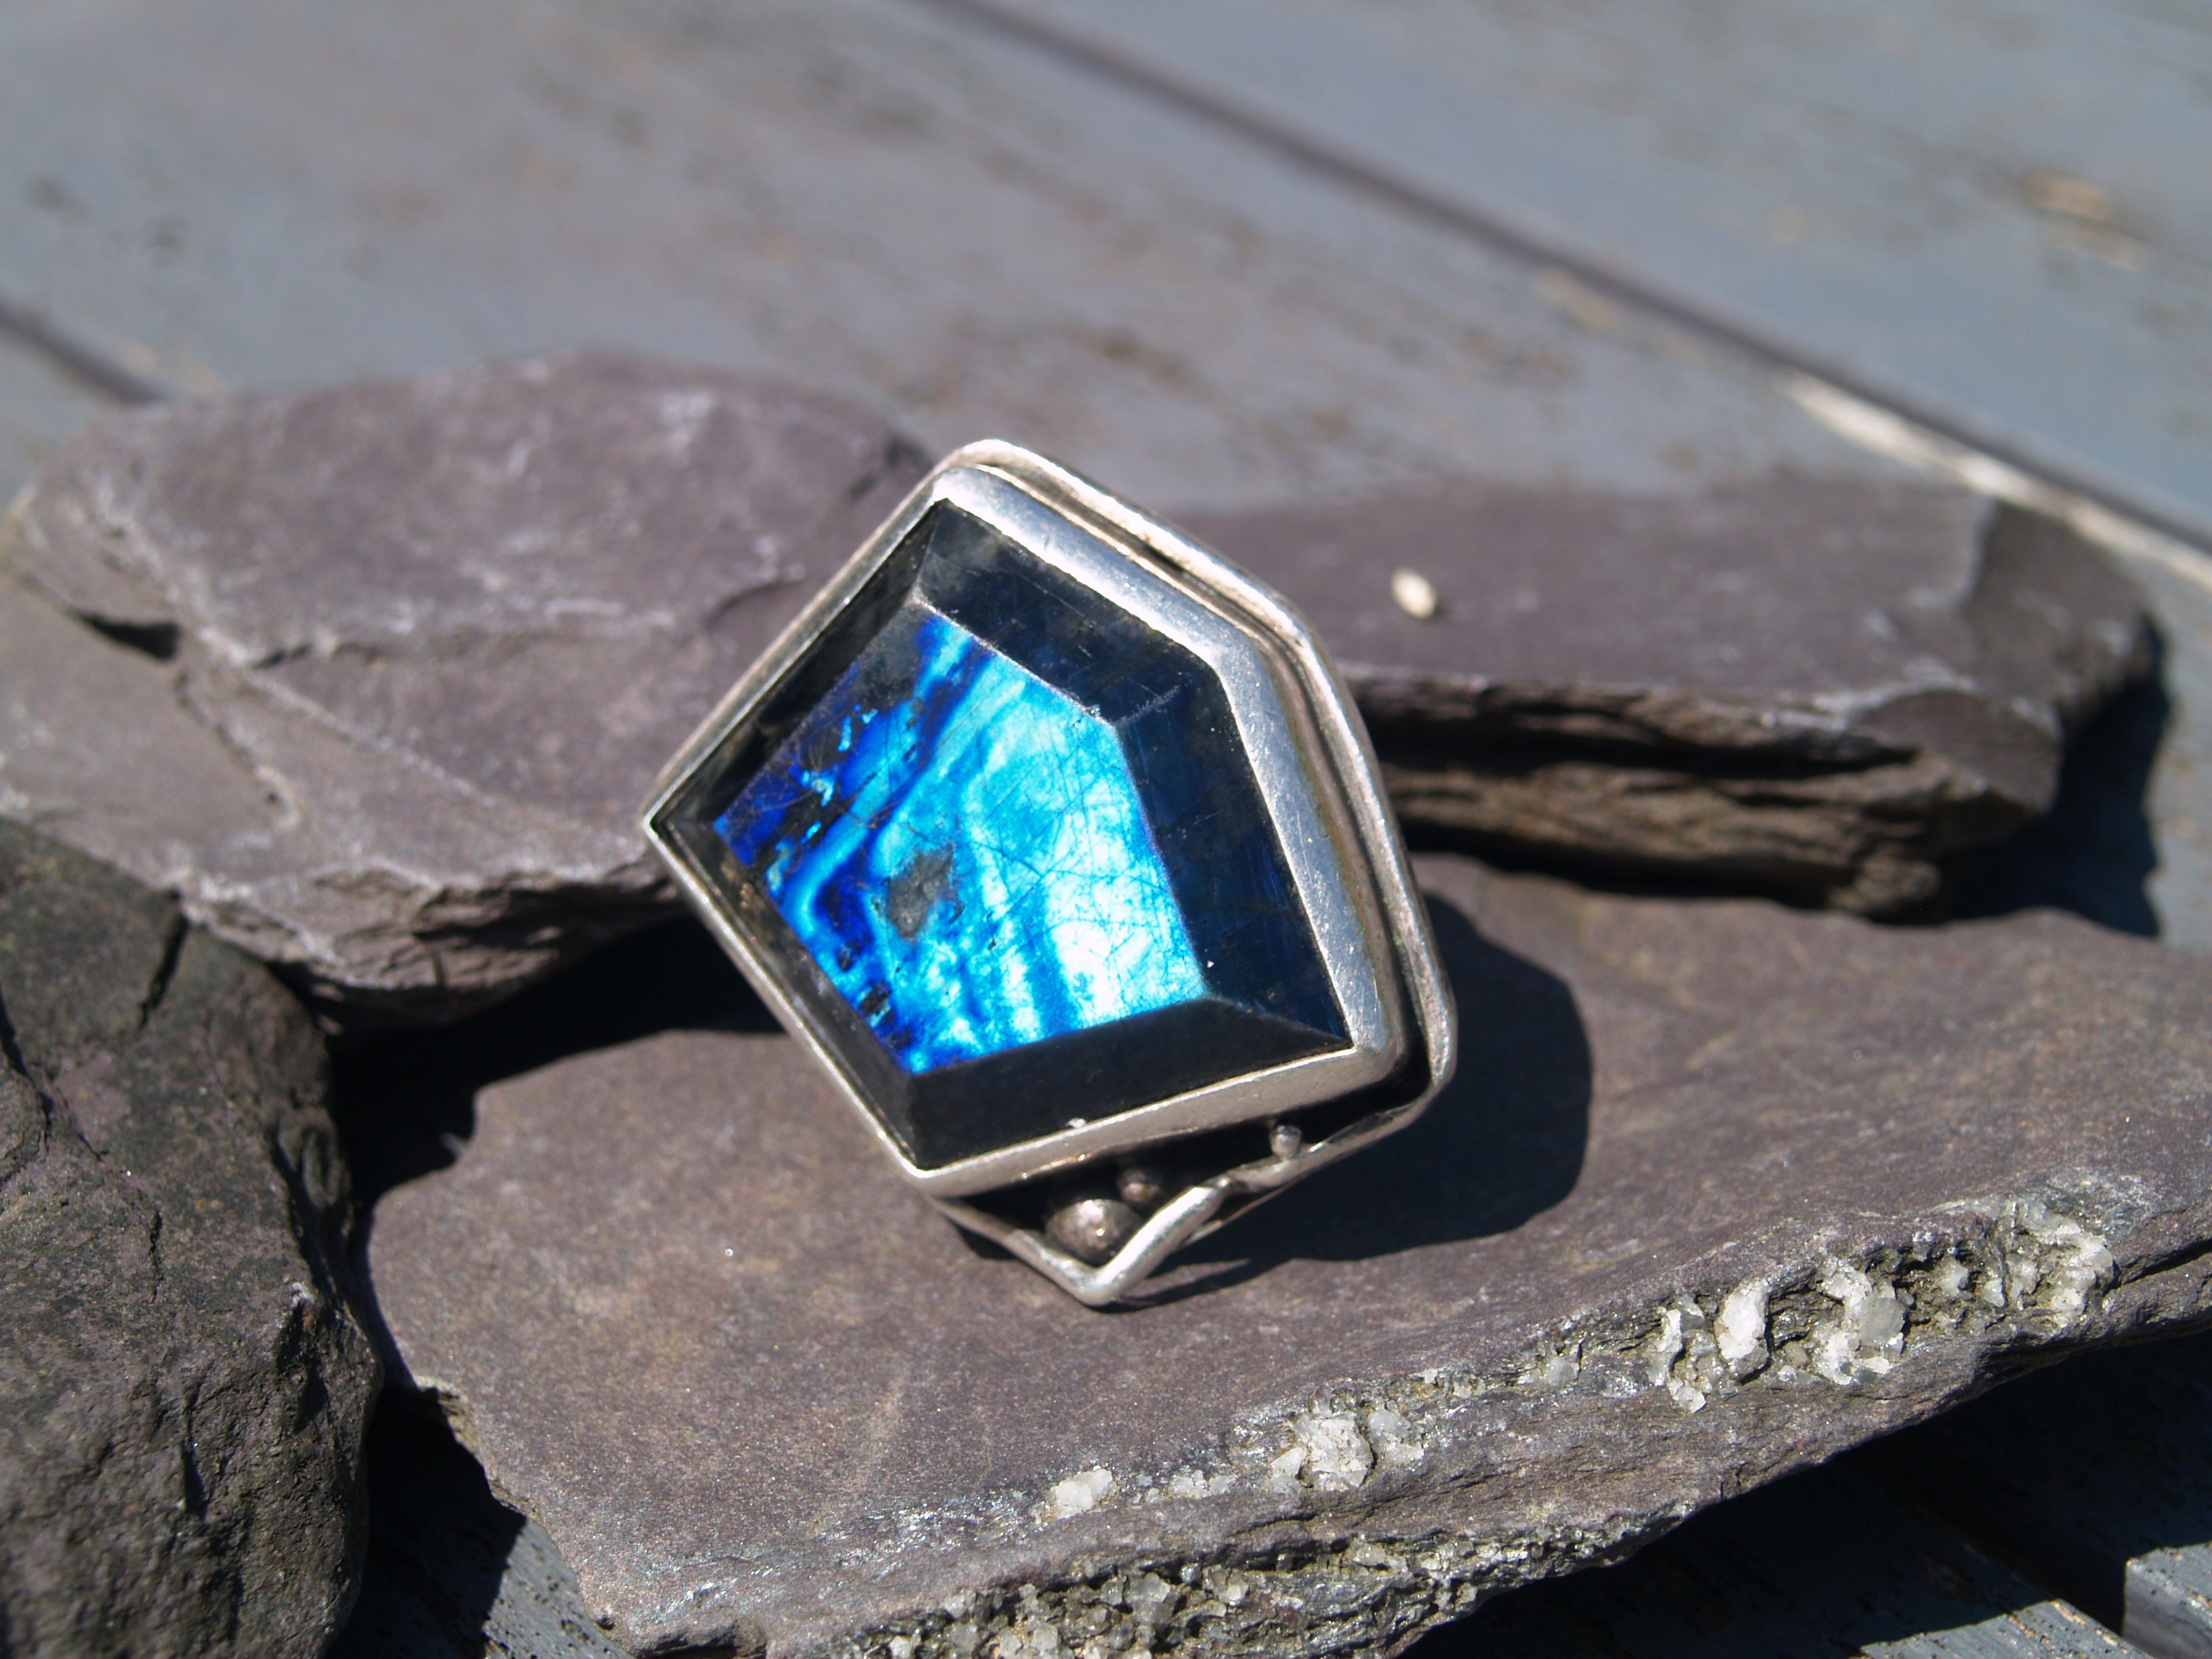 Designer Sterling Silver & Labradorite Ring By Andrzej Pacak Size R or 8 3/4 USA.